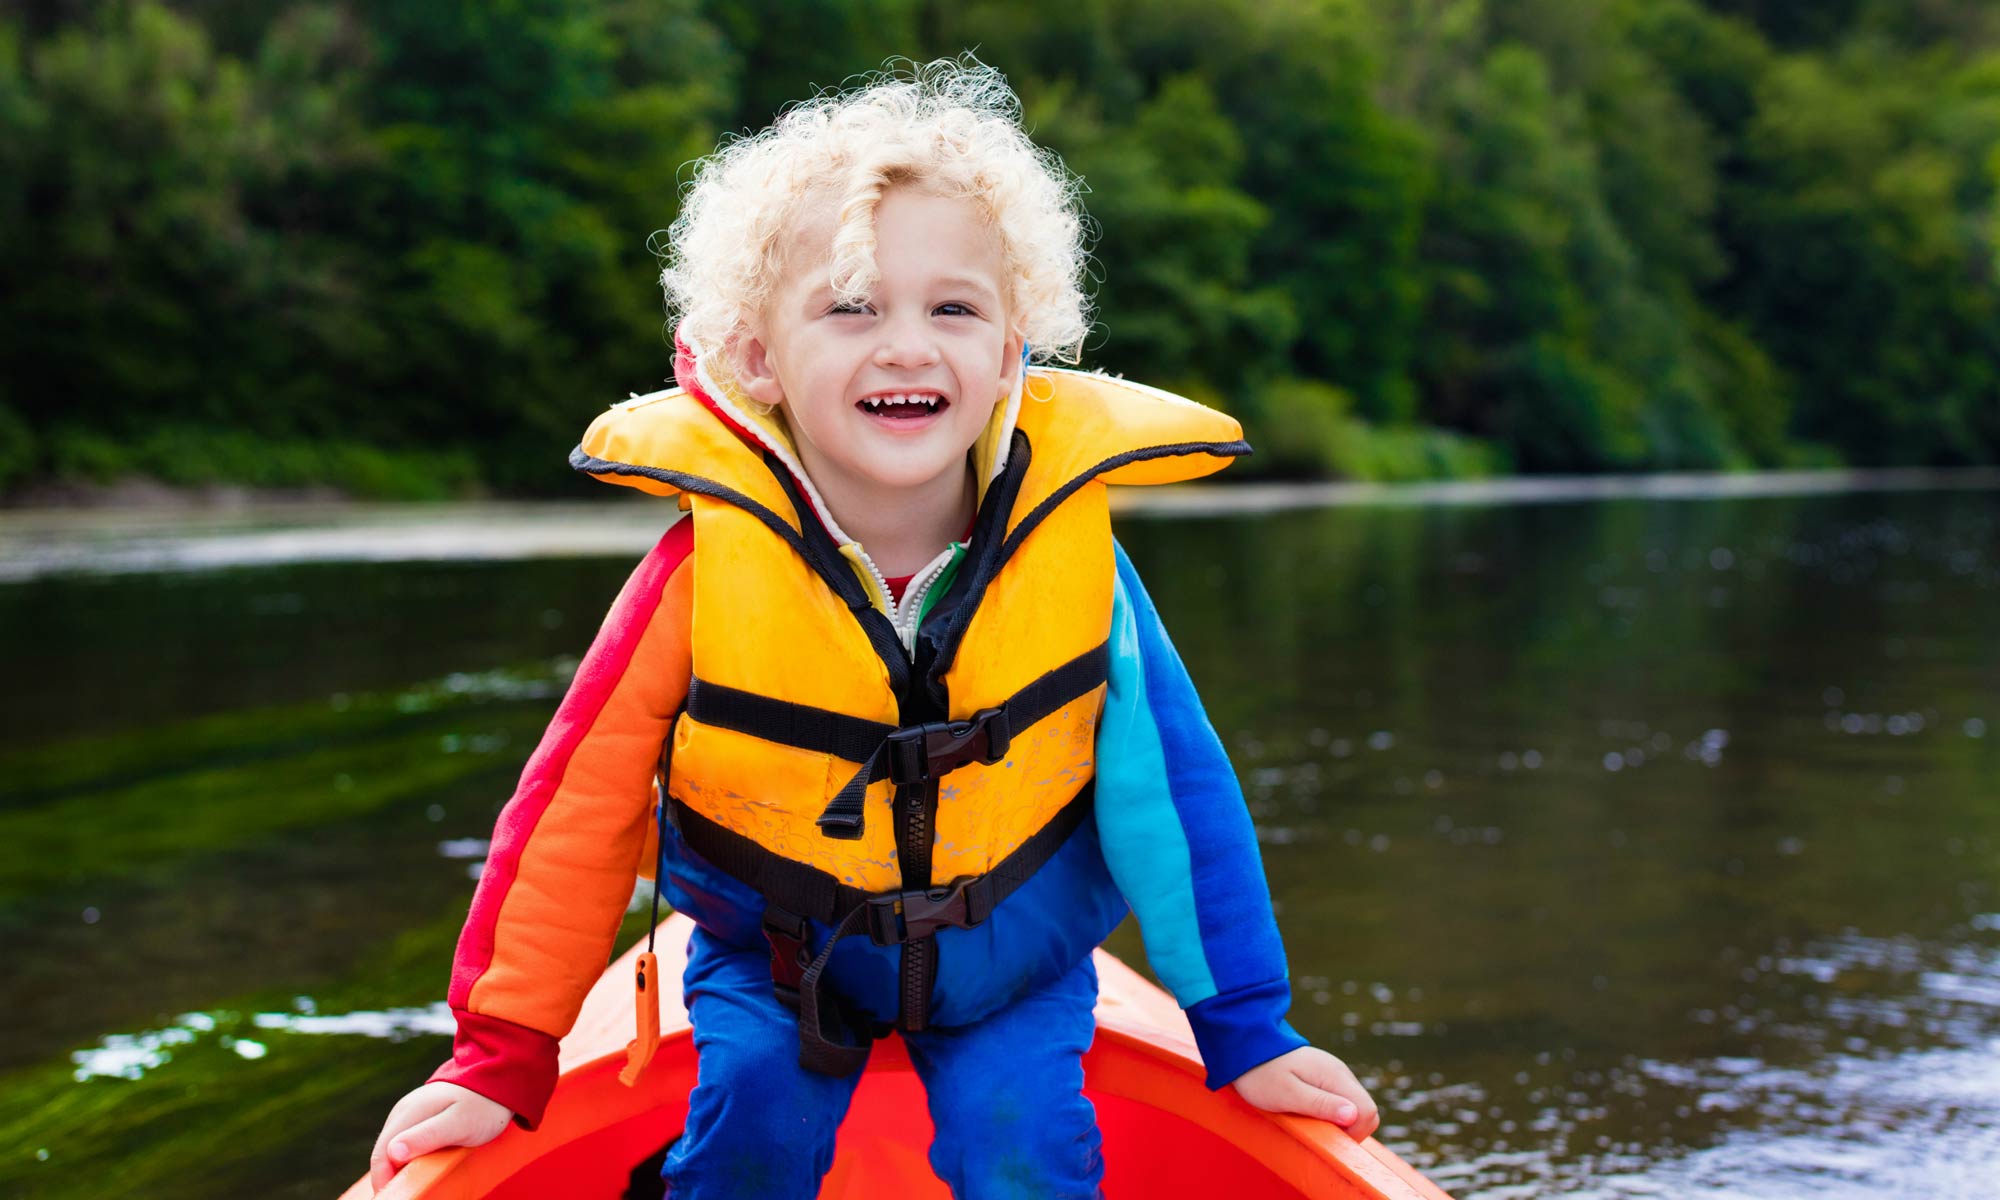 5 Best Life Jackets for Kids: Our Top Picks - AquaViews